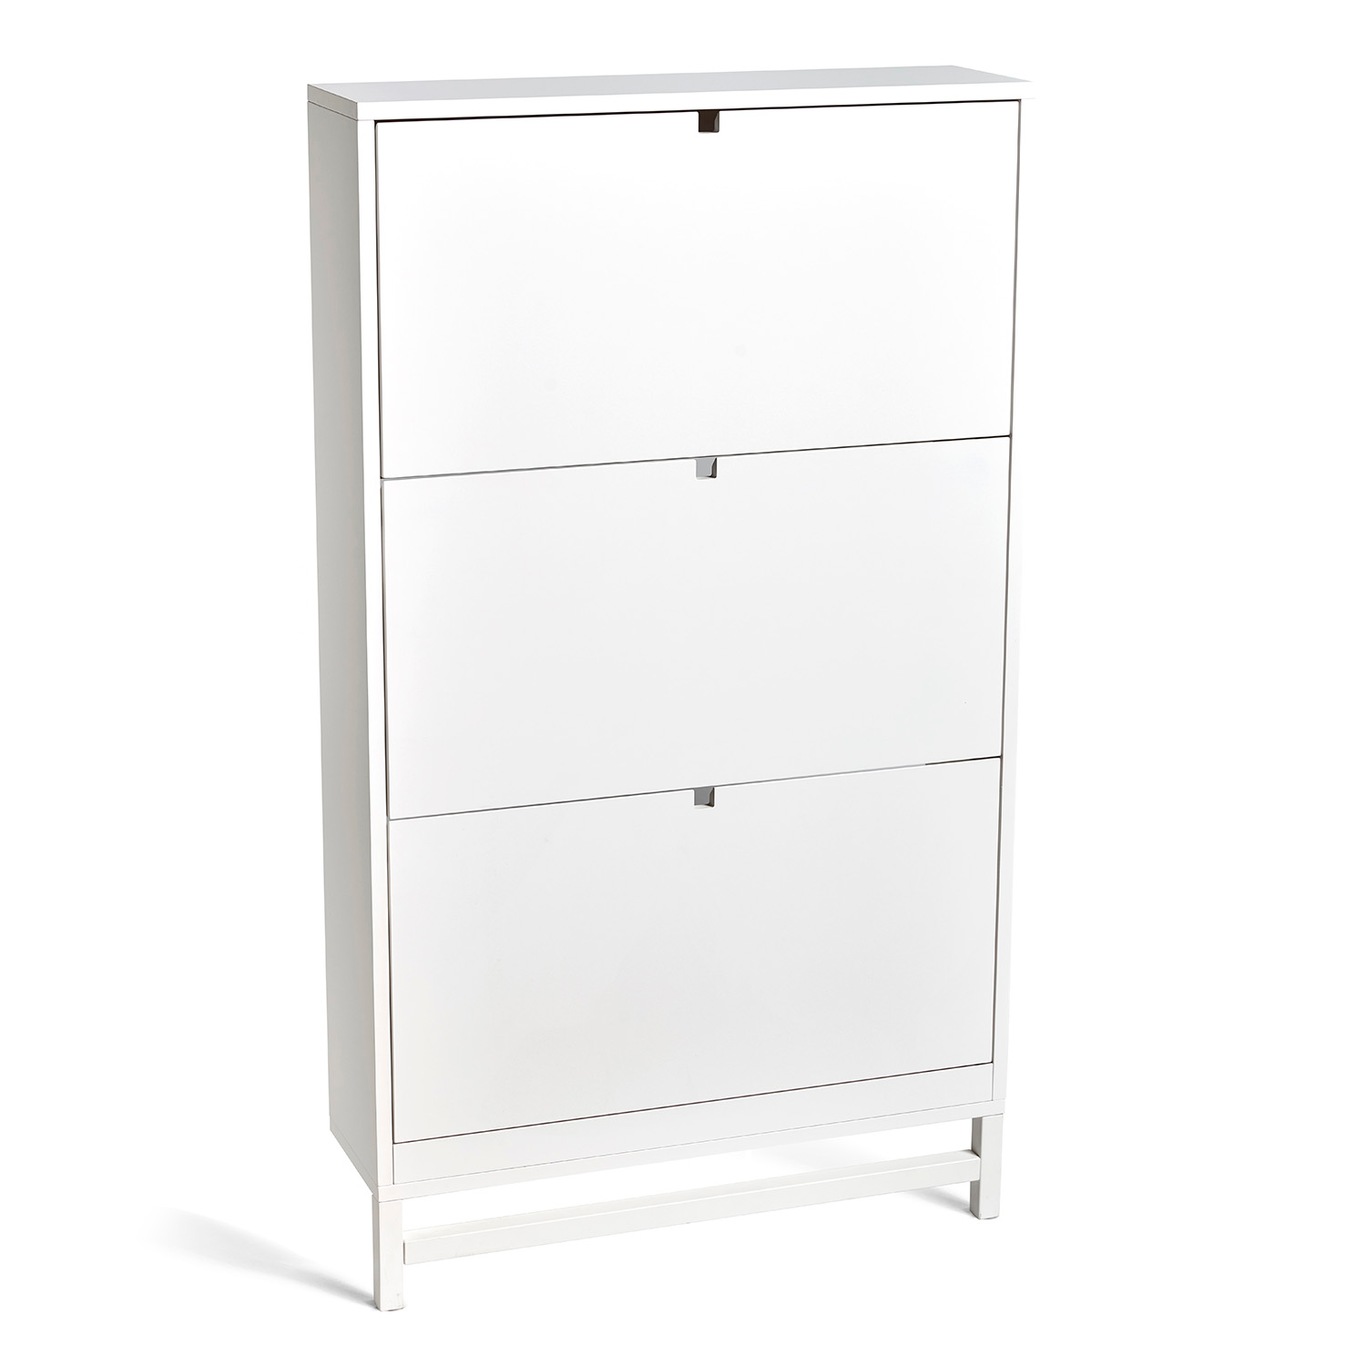 Falsterbo Shoe Cupboard, 3 Compartments, White Lacquer